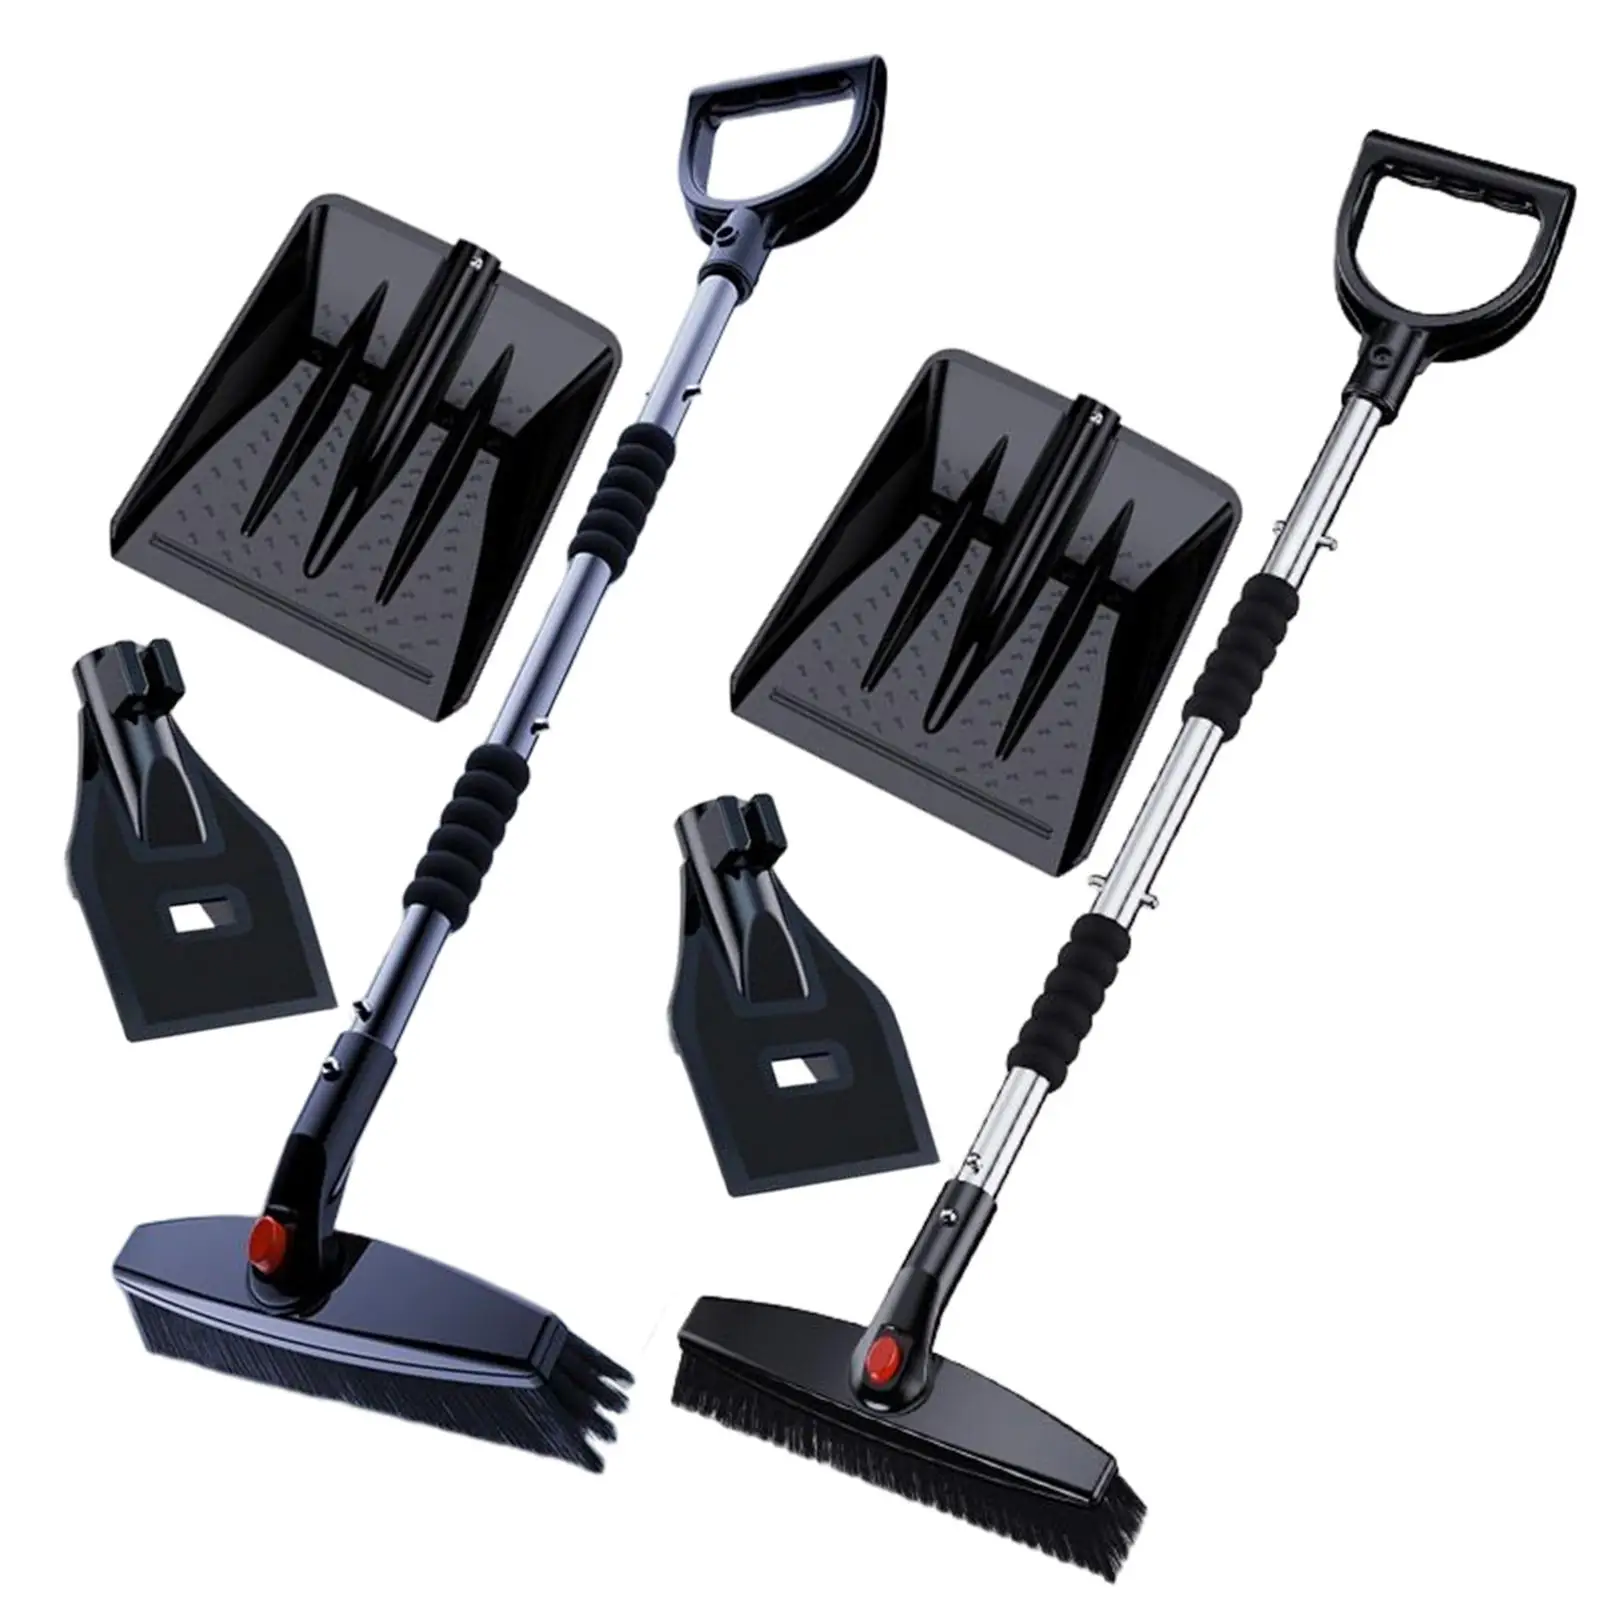 Professional Snow Removal Tool Set Snow Scraper Brush Telescopic Adjustable Car Window Snow Cleaner for Car Auto Truck Vehicles